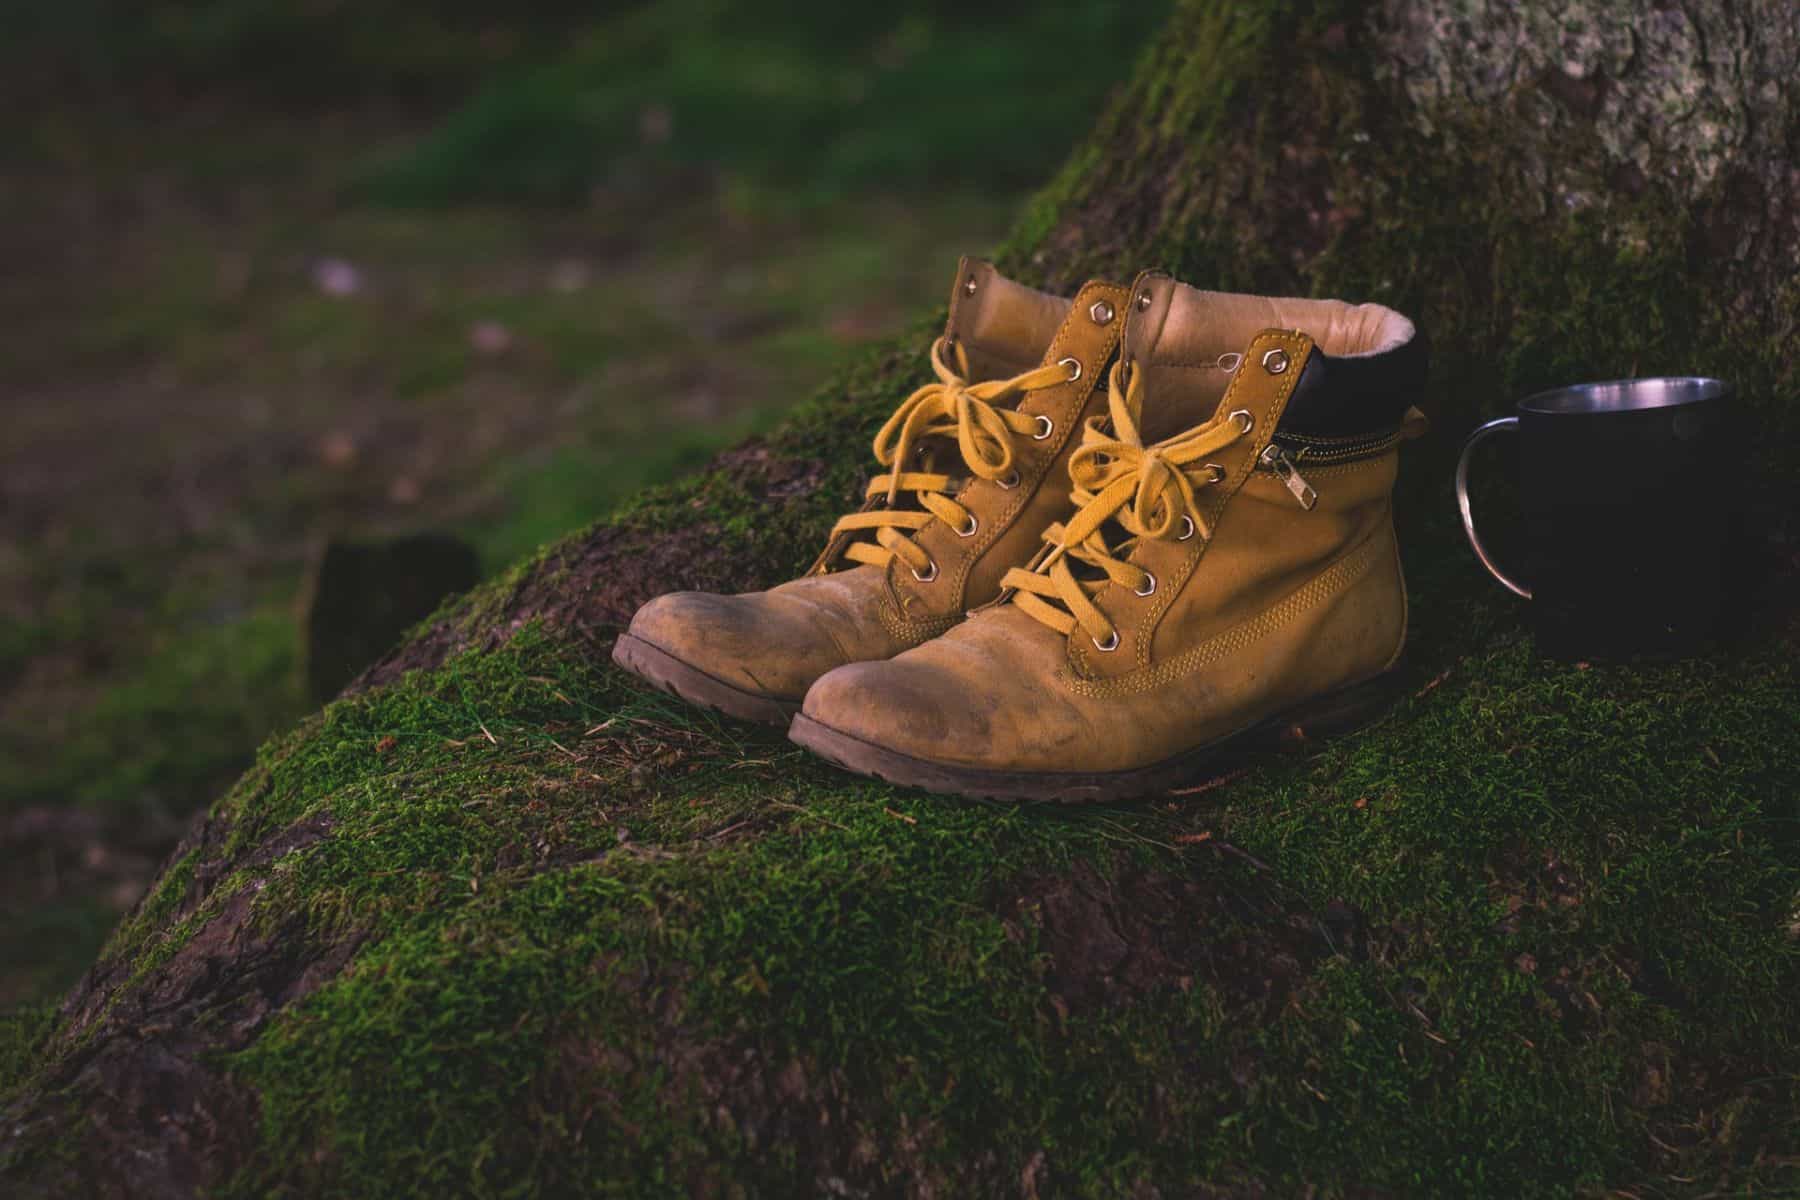 Boots on a mossy nature background